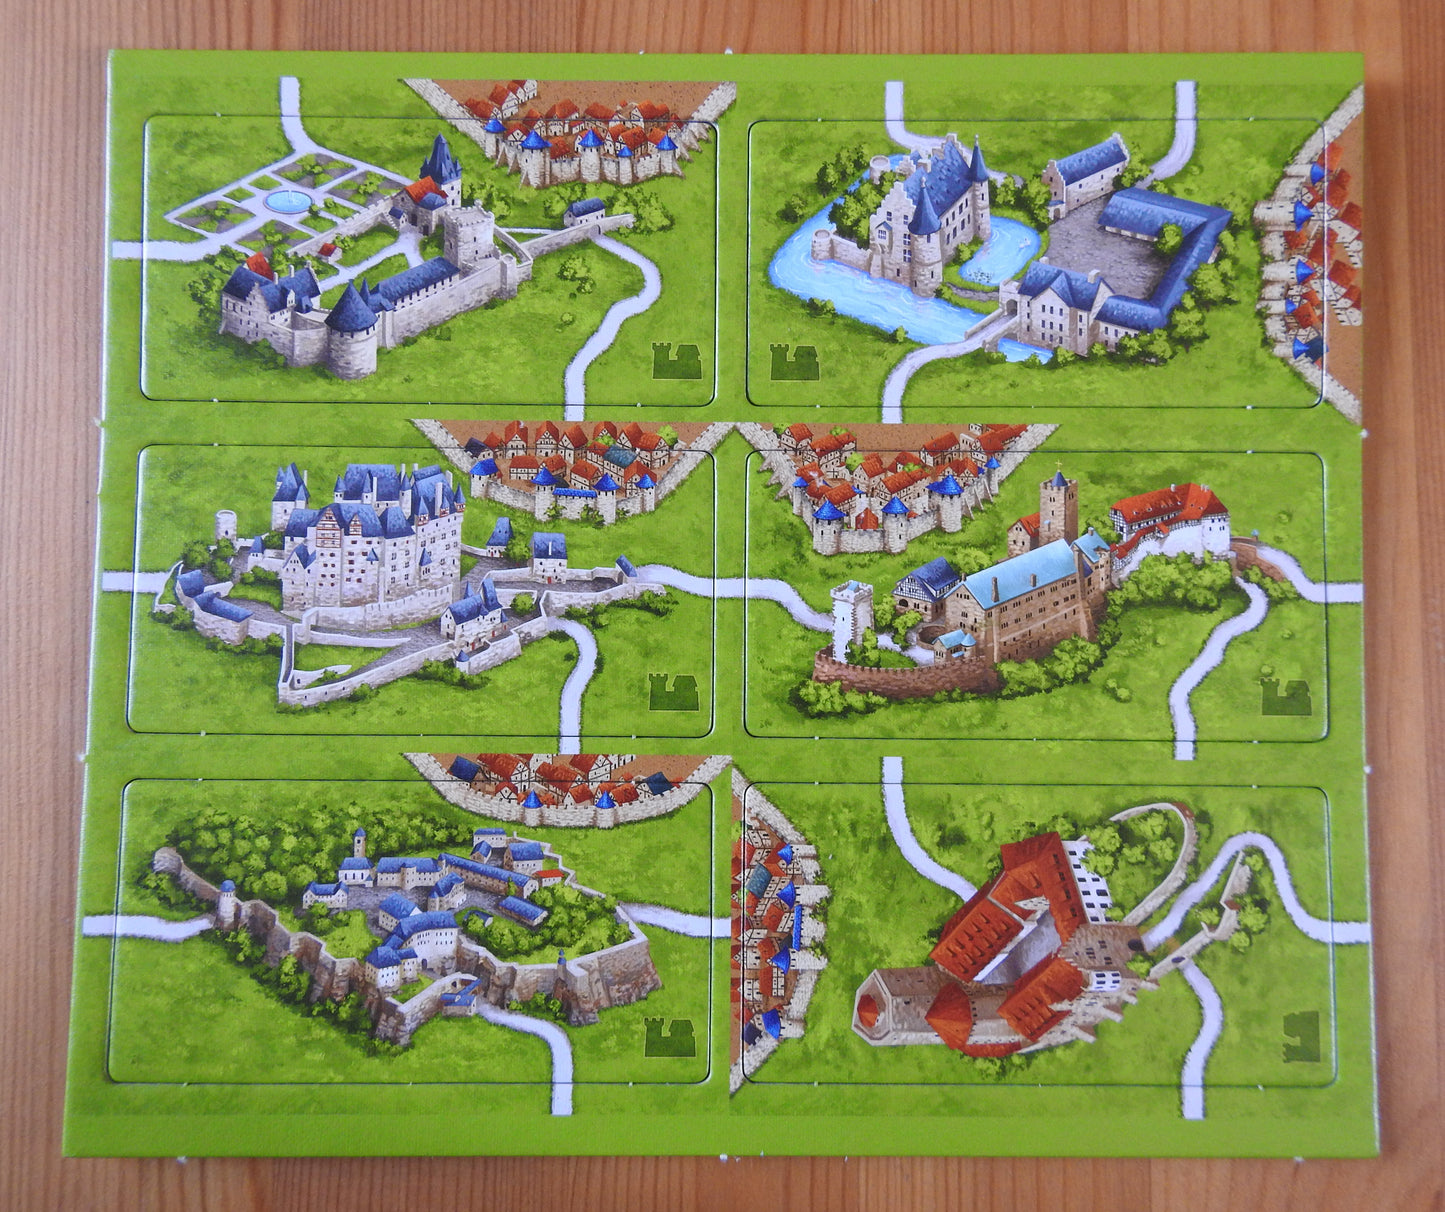 View showing all six of the double sized landscape tiles included in this German Castles mini expansion for Carcassonne.